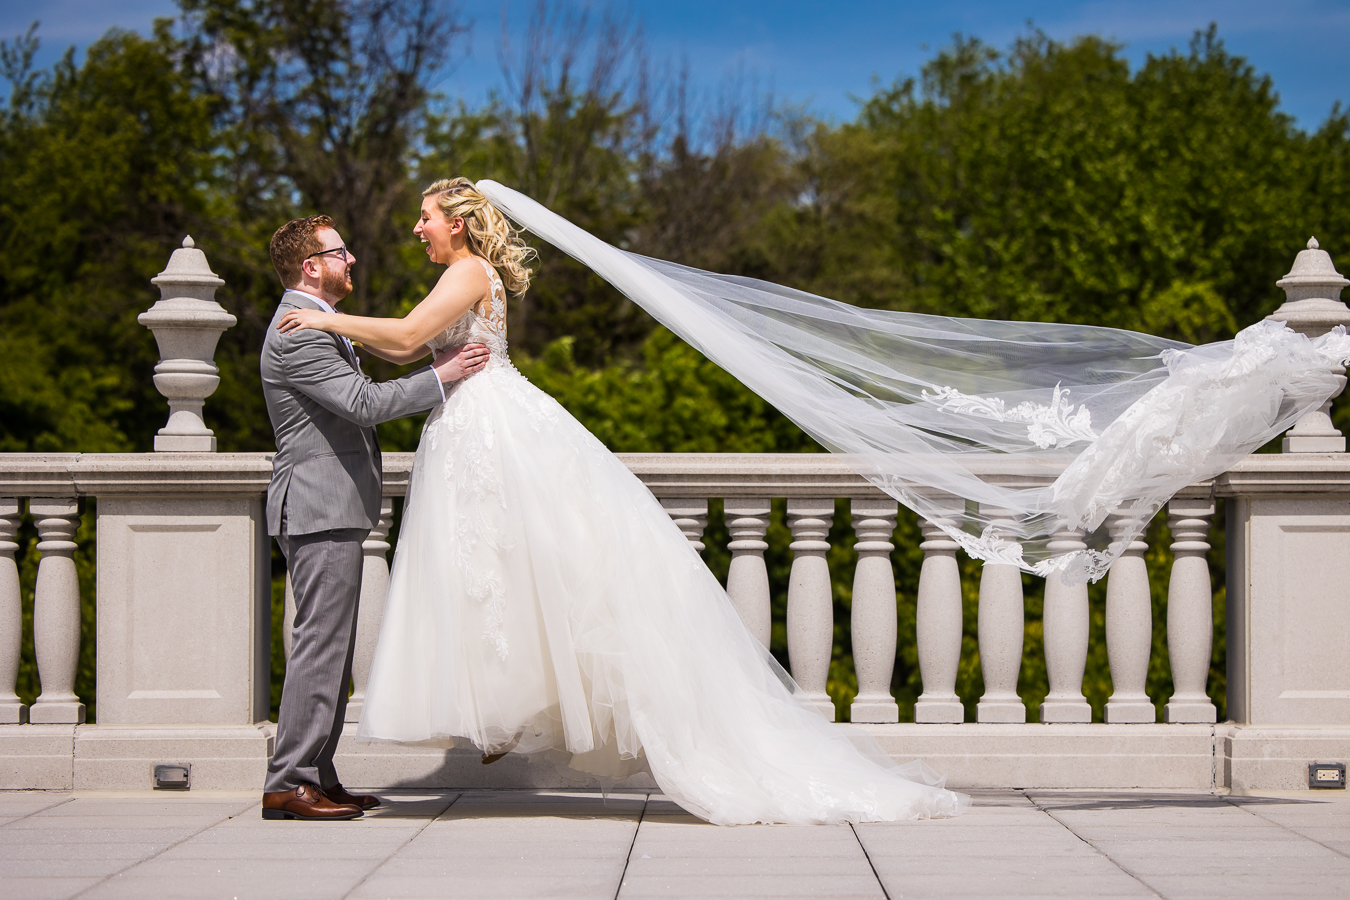 creative NJ Wedding Photographer, captures this candid, authentic moment of the bride jumping with excitement into her groom's arms as her veil blows in the wind behind her during their first look at the palace at somerset park